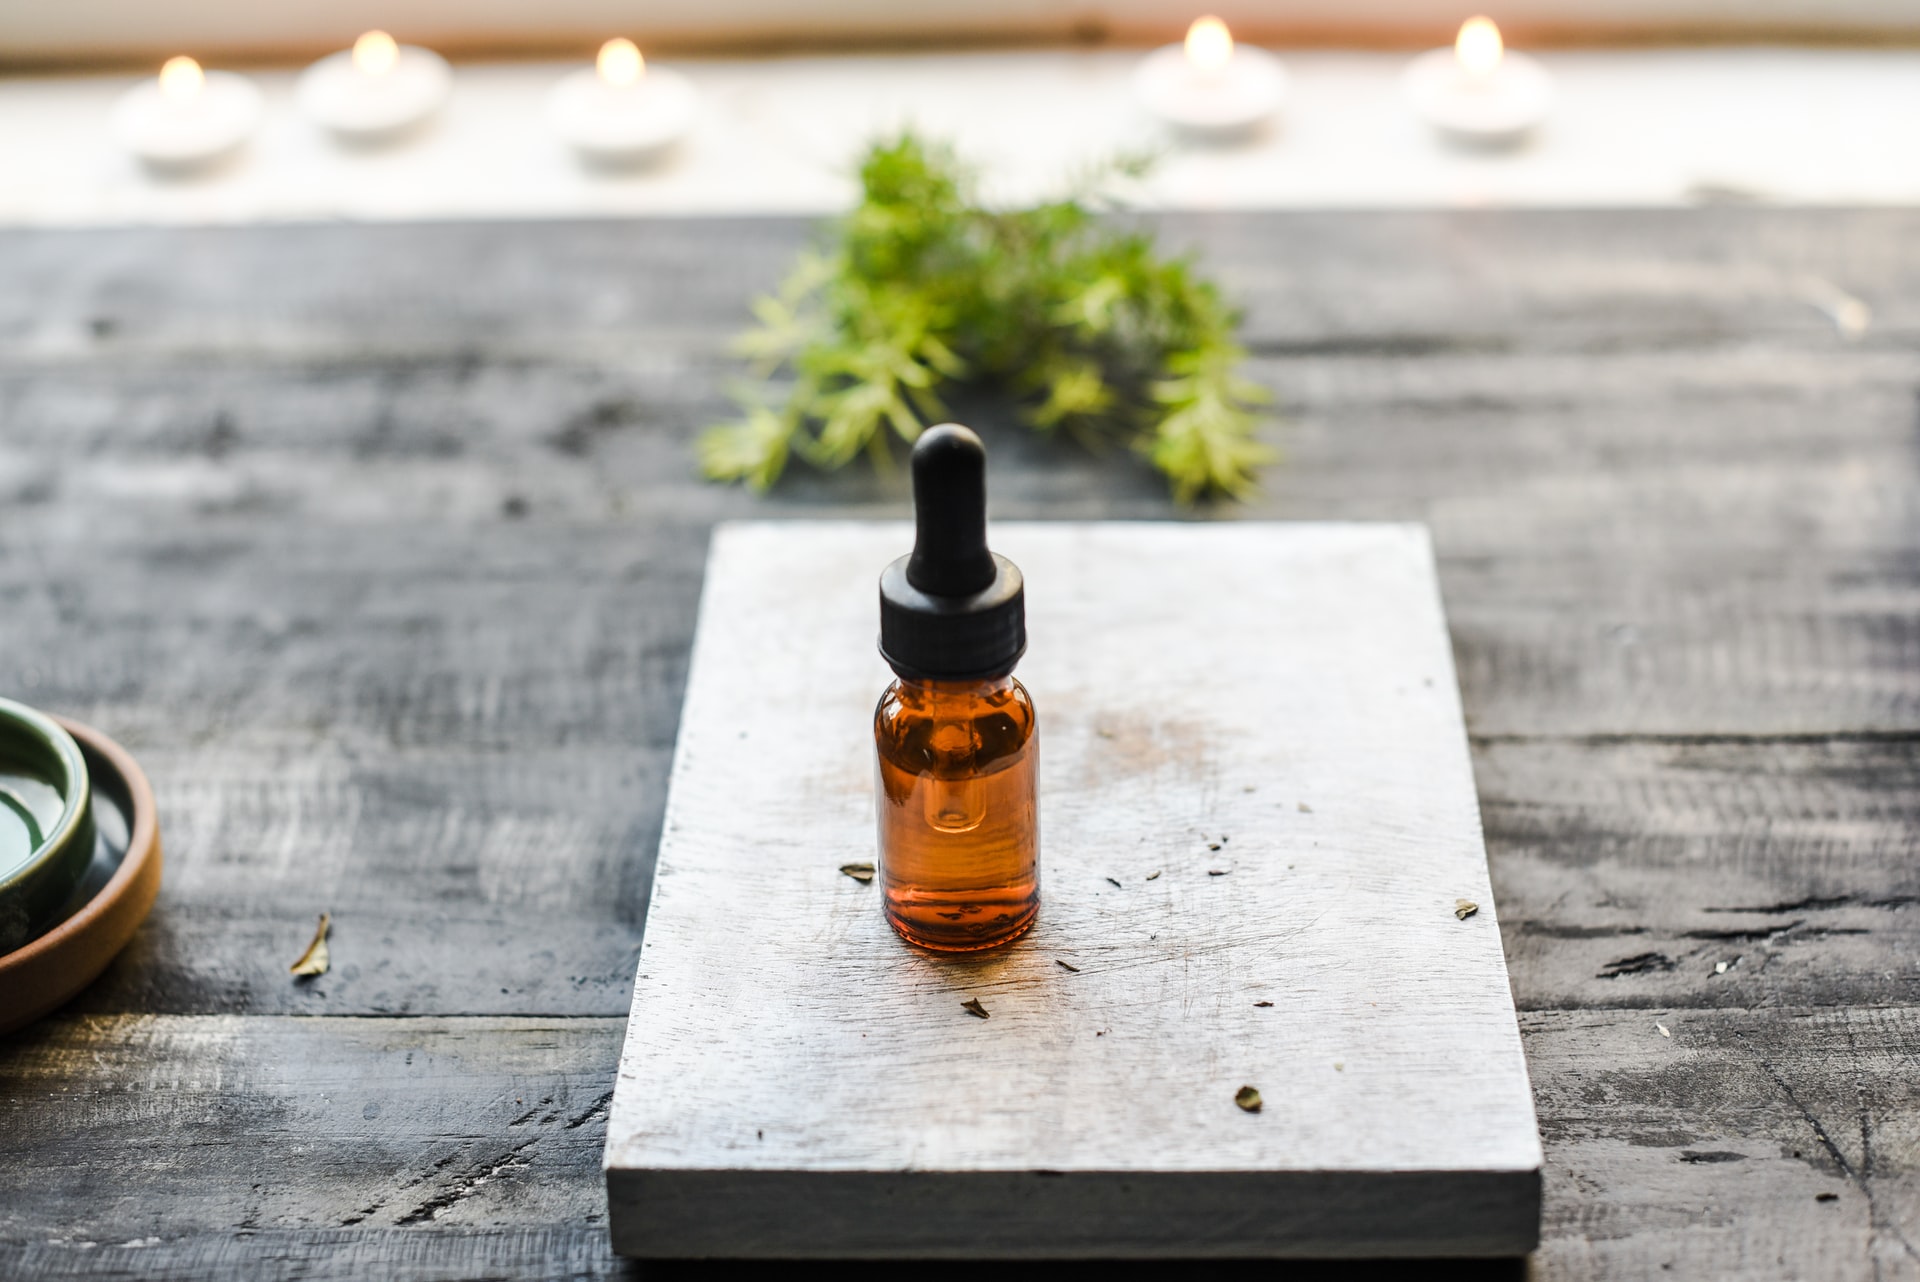 A closed bottle of CBD oil tincture sitting on a pedestal with a blurry background of a cannabis leaf